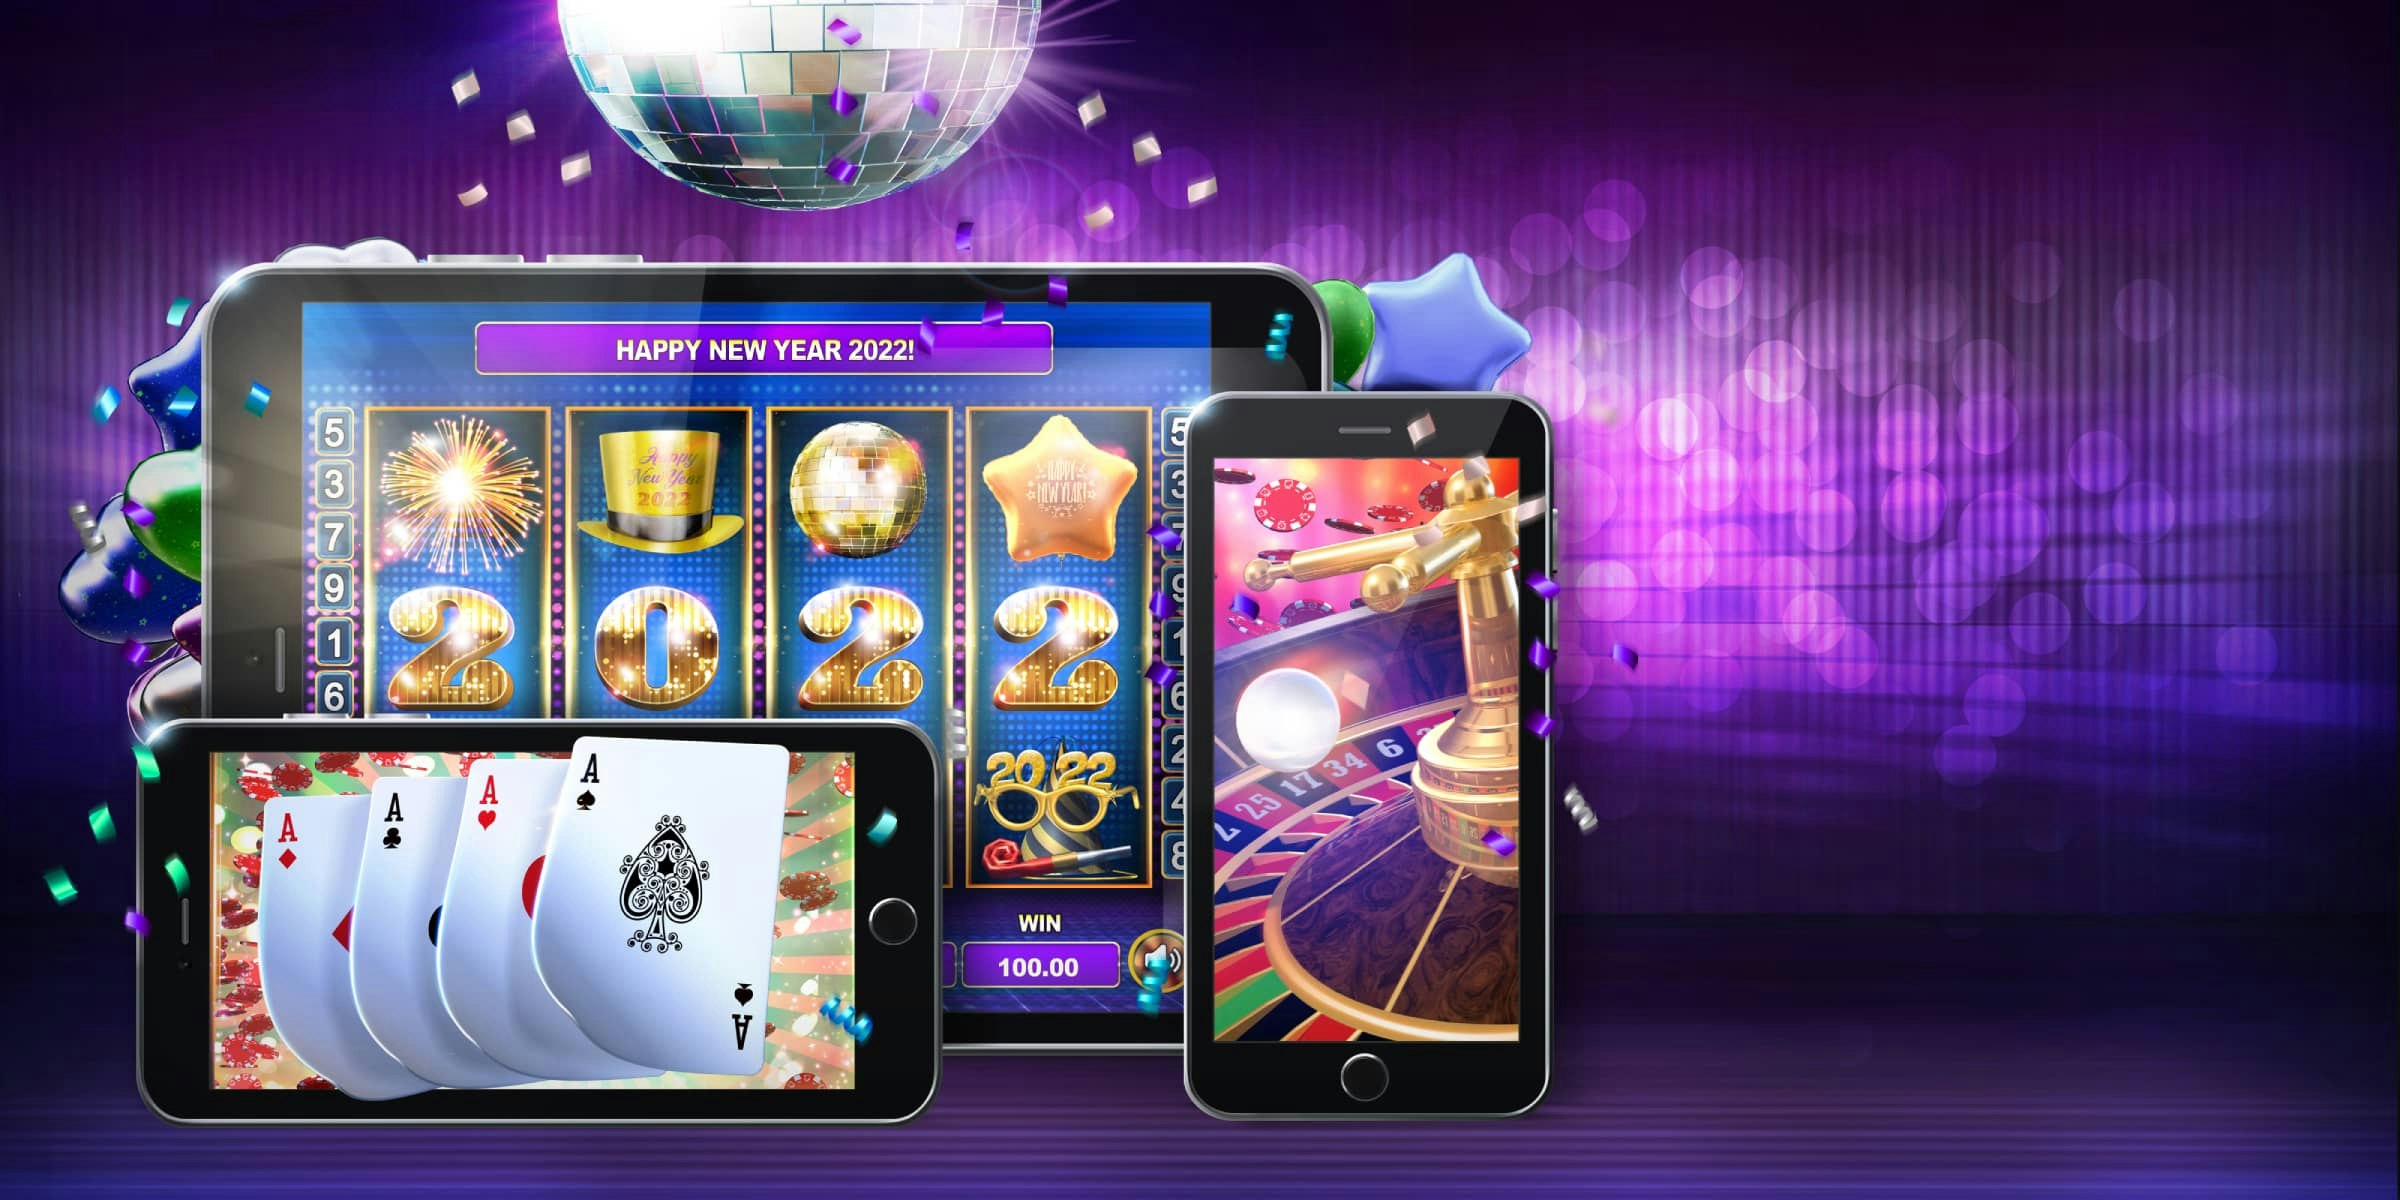 Why mobile casinos will be more popular in 2022